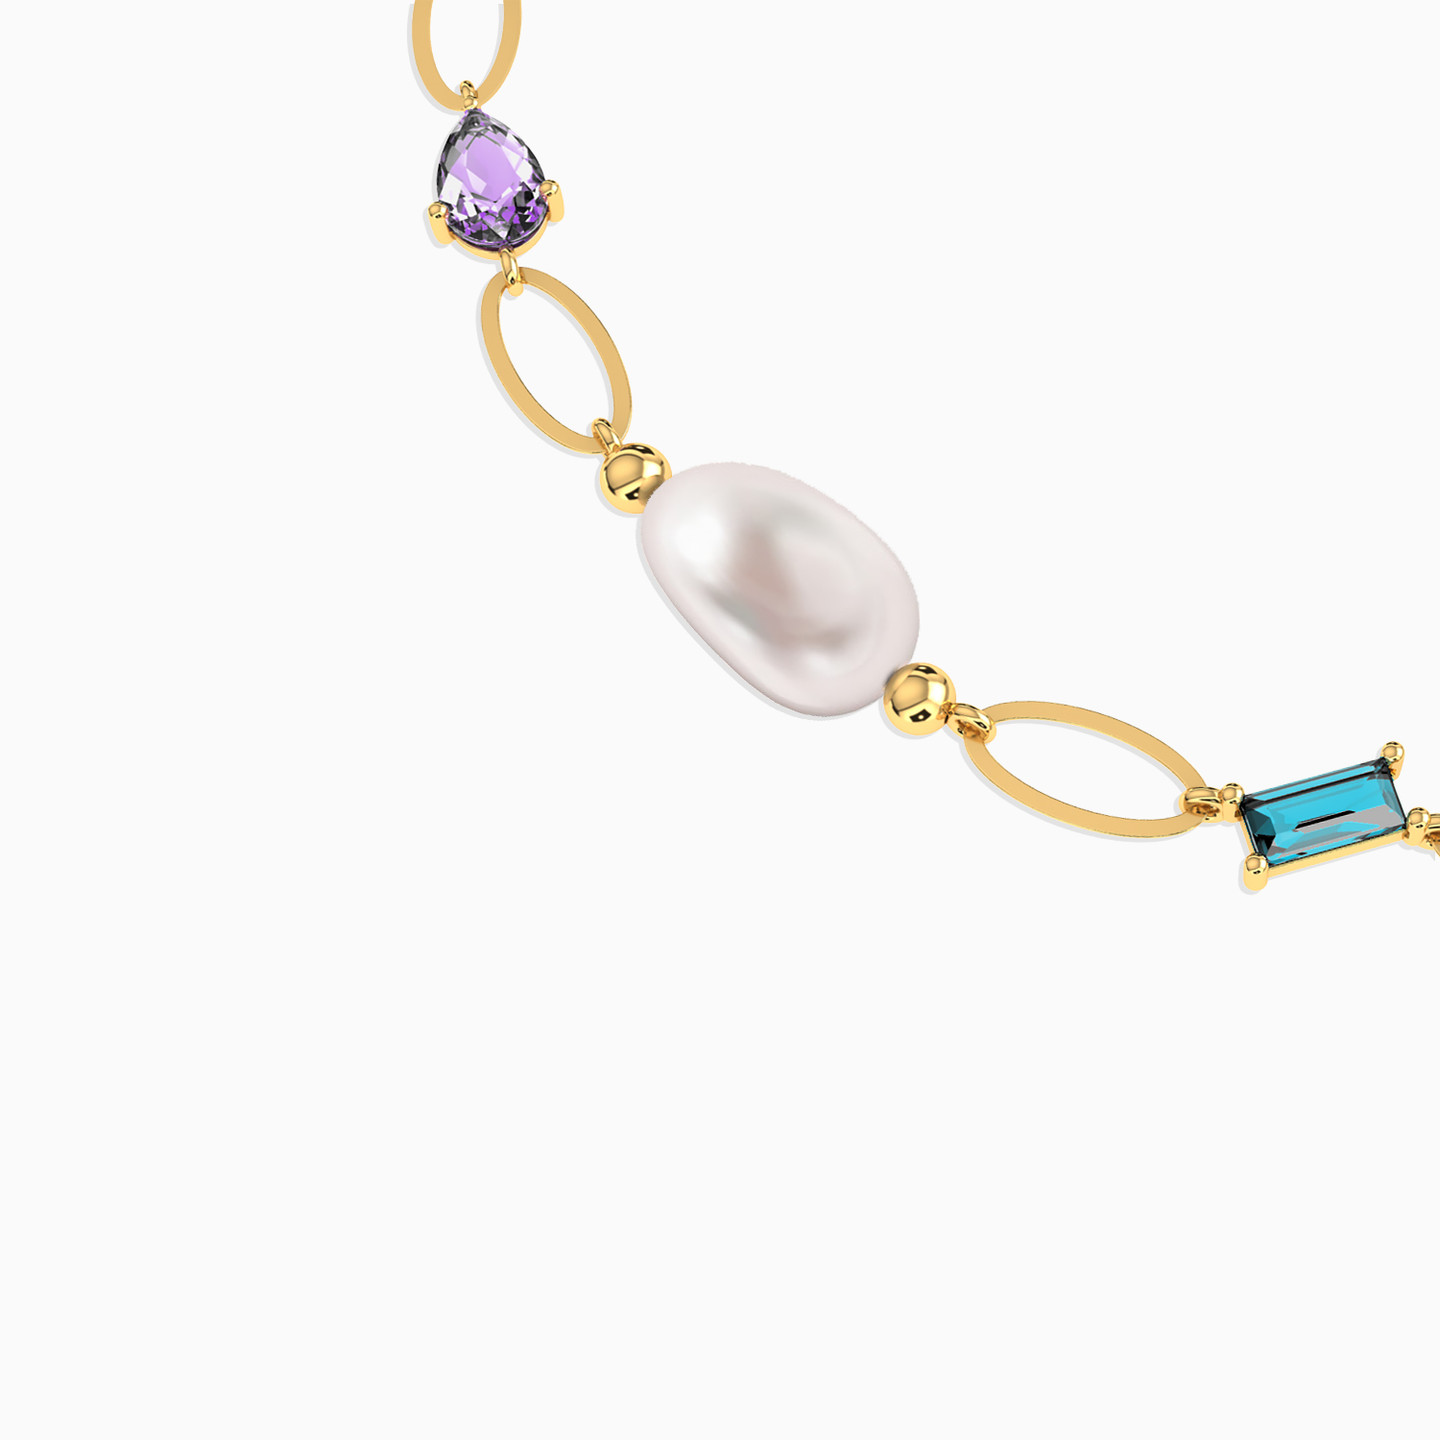 18K Gold Pearls & Colored Stones Chain Bracelet - 3